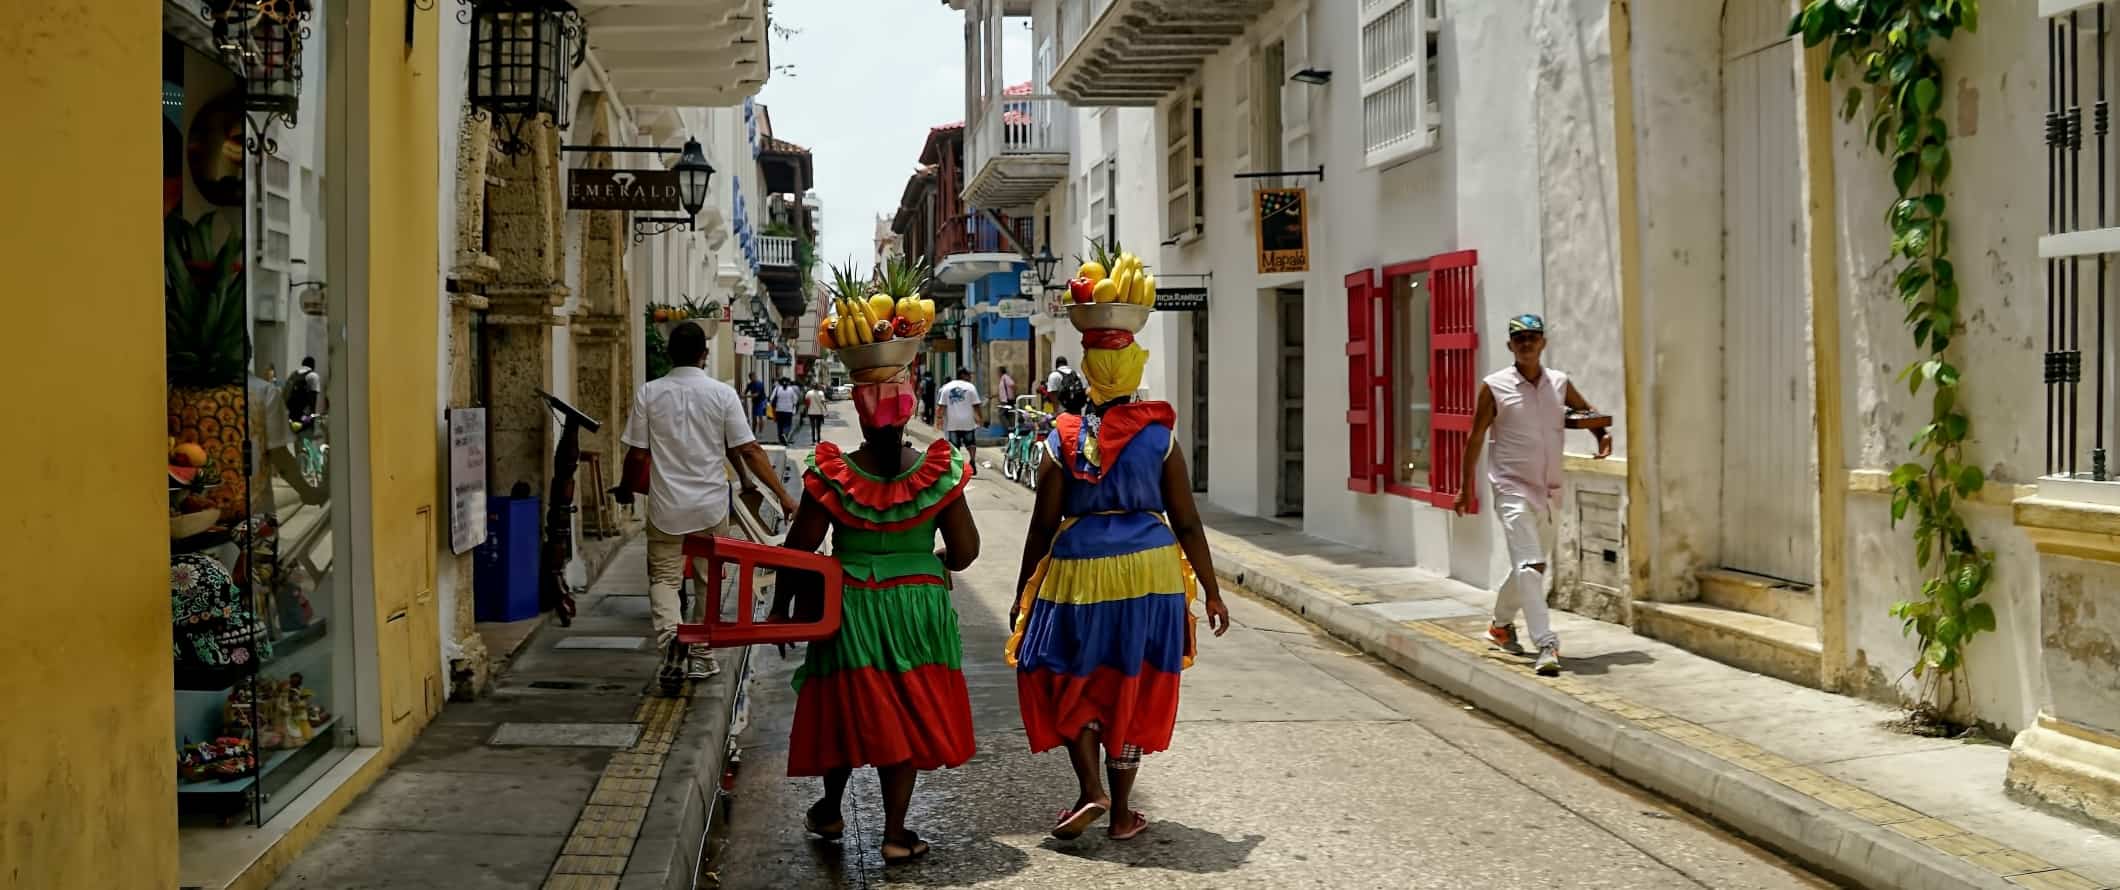 Two women in bright, colorful dresses, walking down a street with baskets of fruit on their heads in Cartagena, Colombia